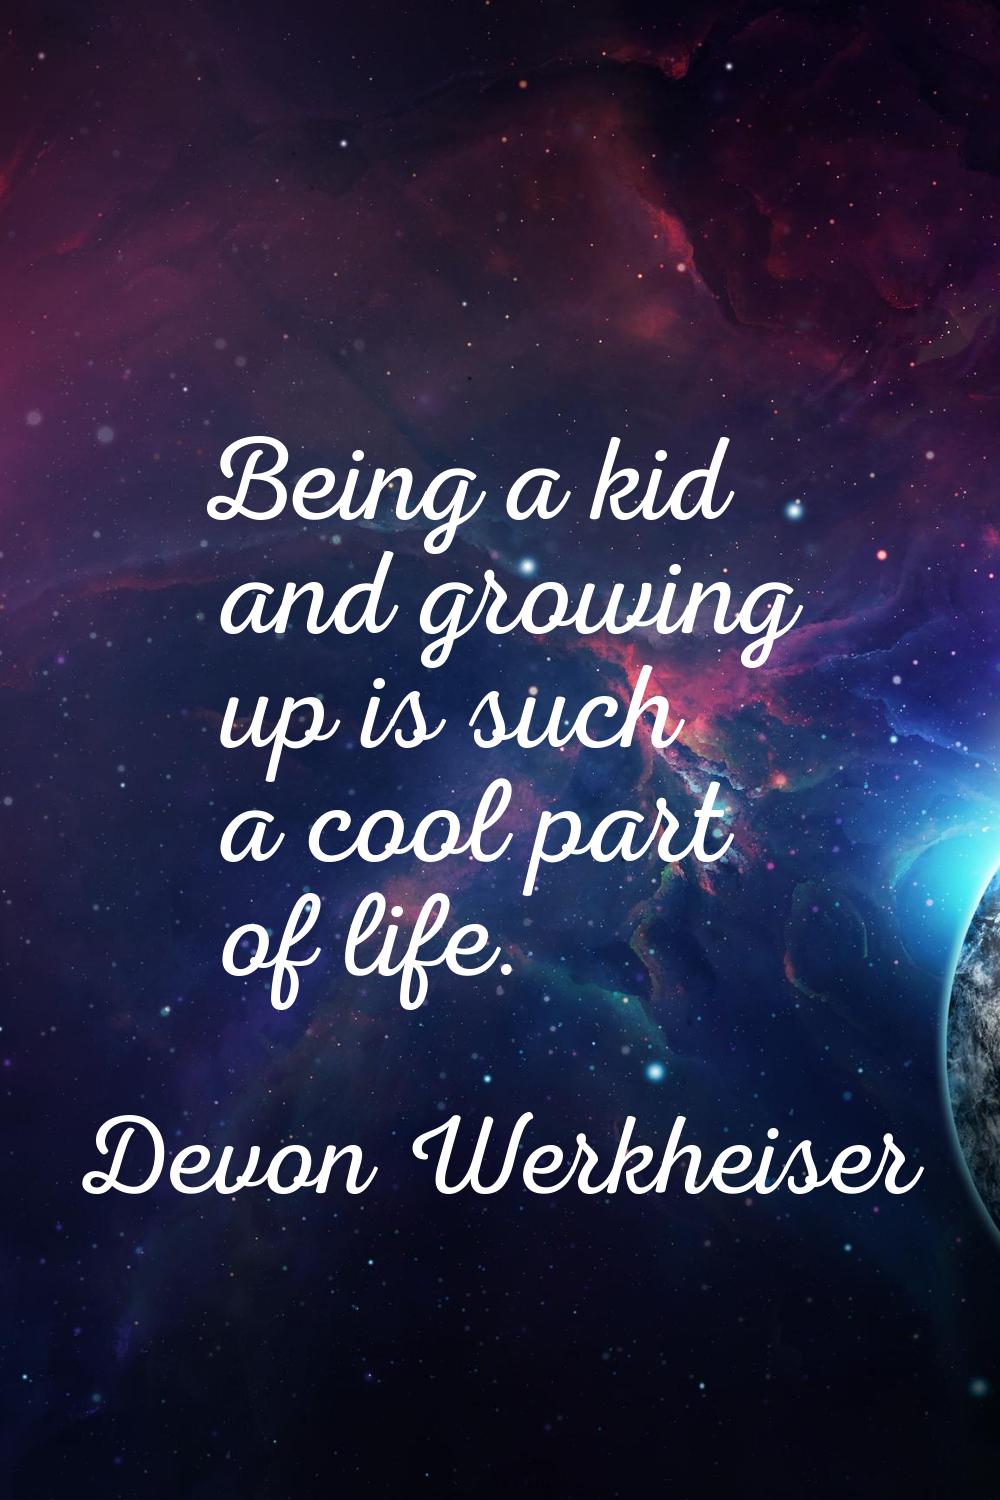 Being a kid and growing up is such a cool part of life.